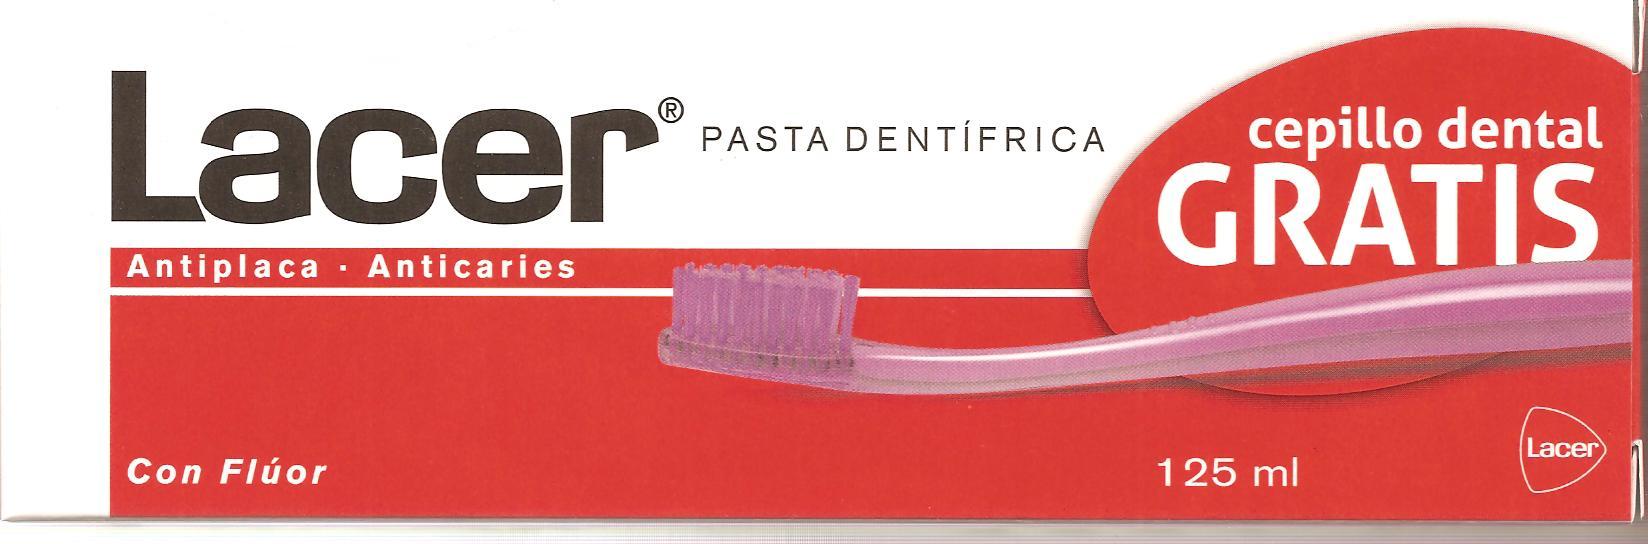 LACER TOOTHPASTE 150ml + LACER MEDIUM TOOTHBRUSHES